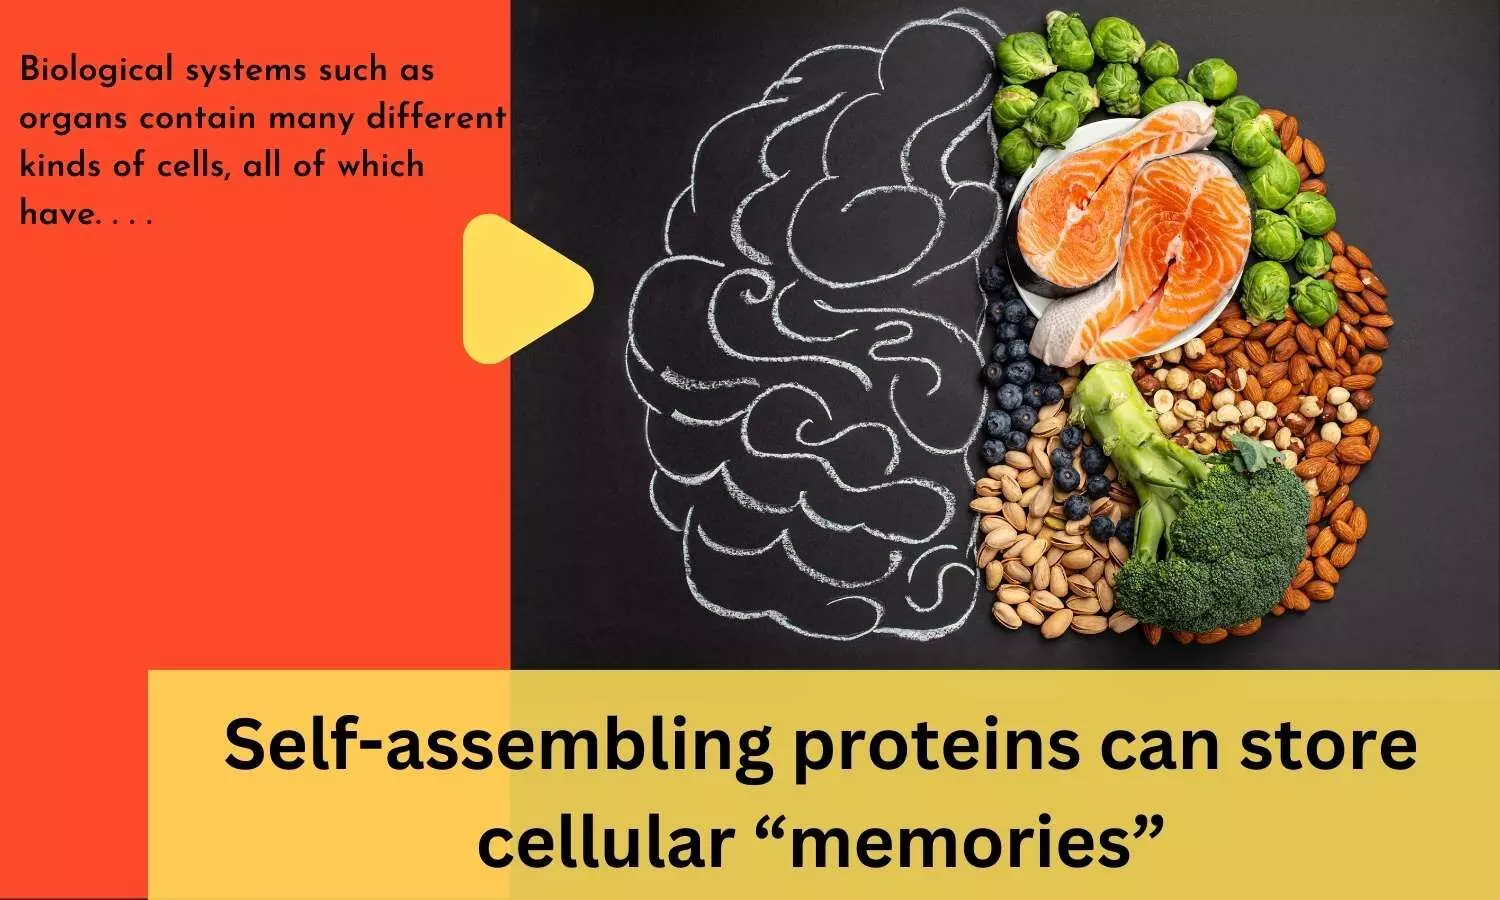 Self-assembling proteins can store cellular memories